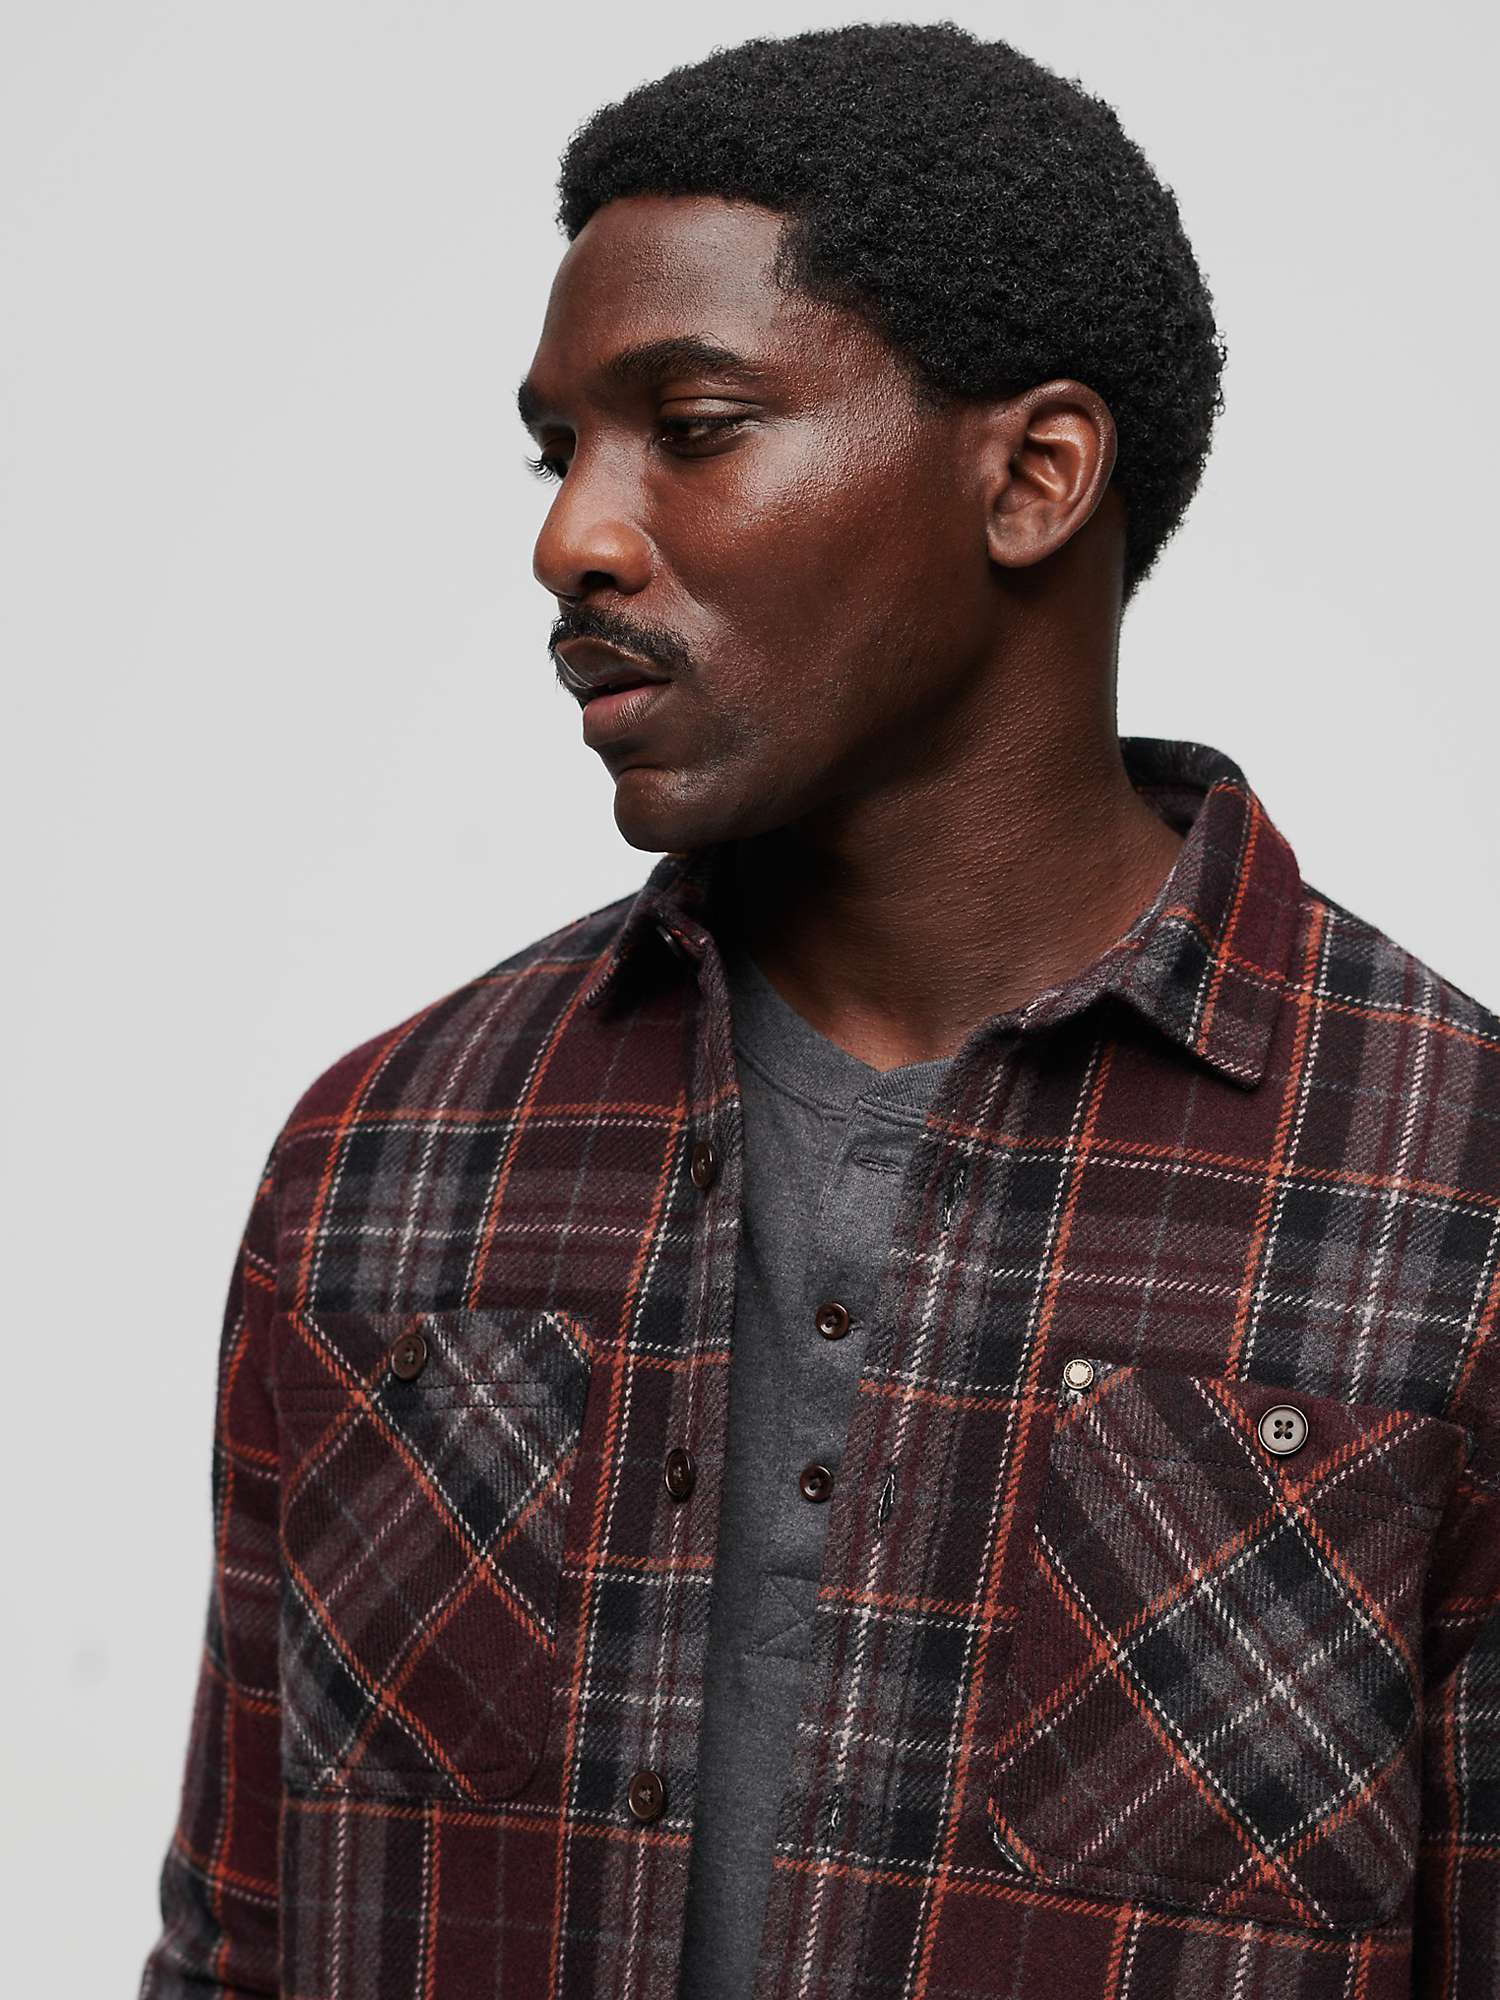 Buy Superdry The Merchant Store Quilted Check Overshirt Online at johnlewis.com